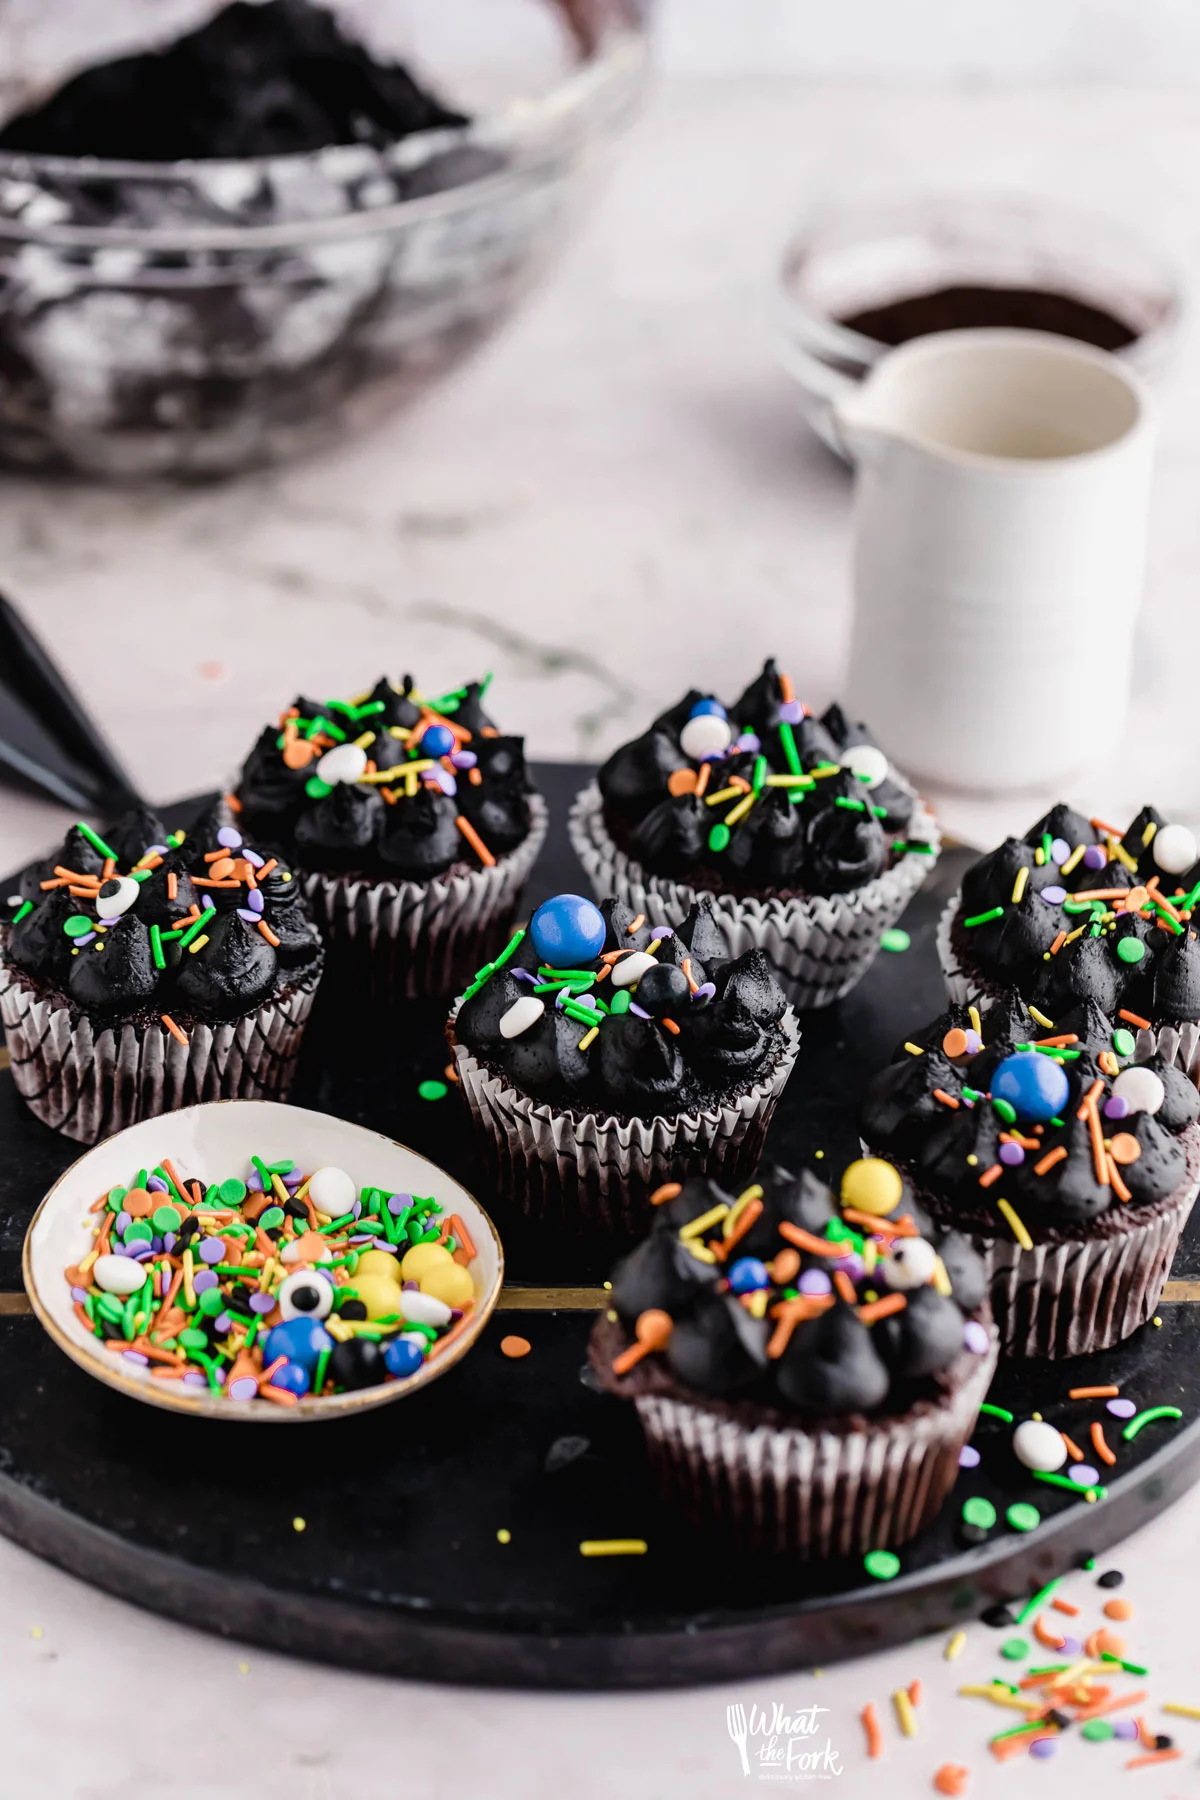 Black Frosting Recipe (American Buttercream) used to decorate chocolate cupcakes that are decorated with Halloween sprinkles on a black serving platter